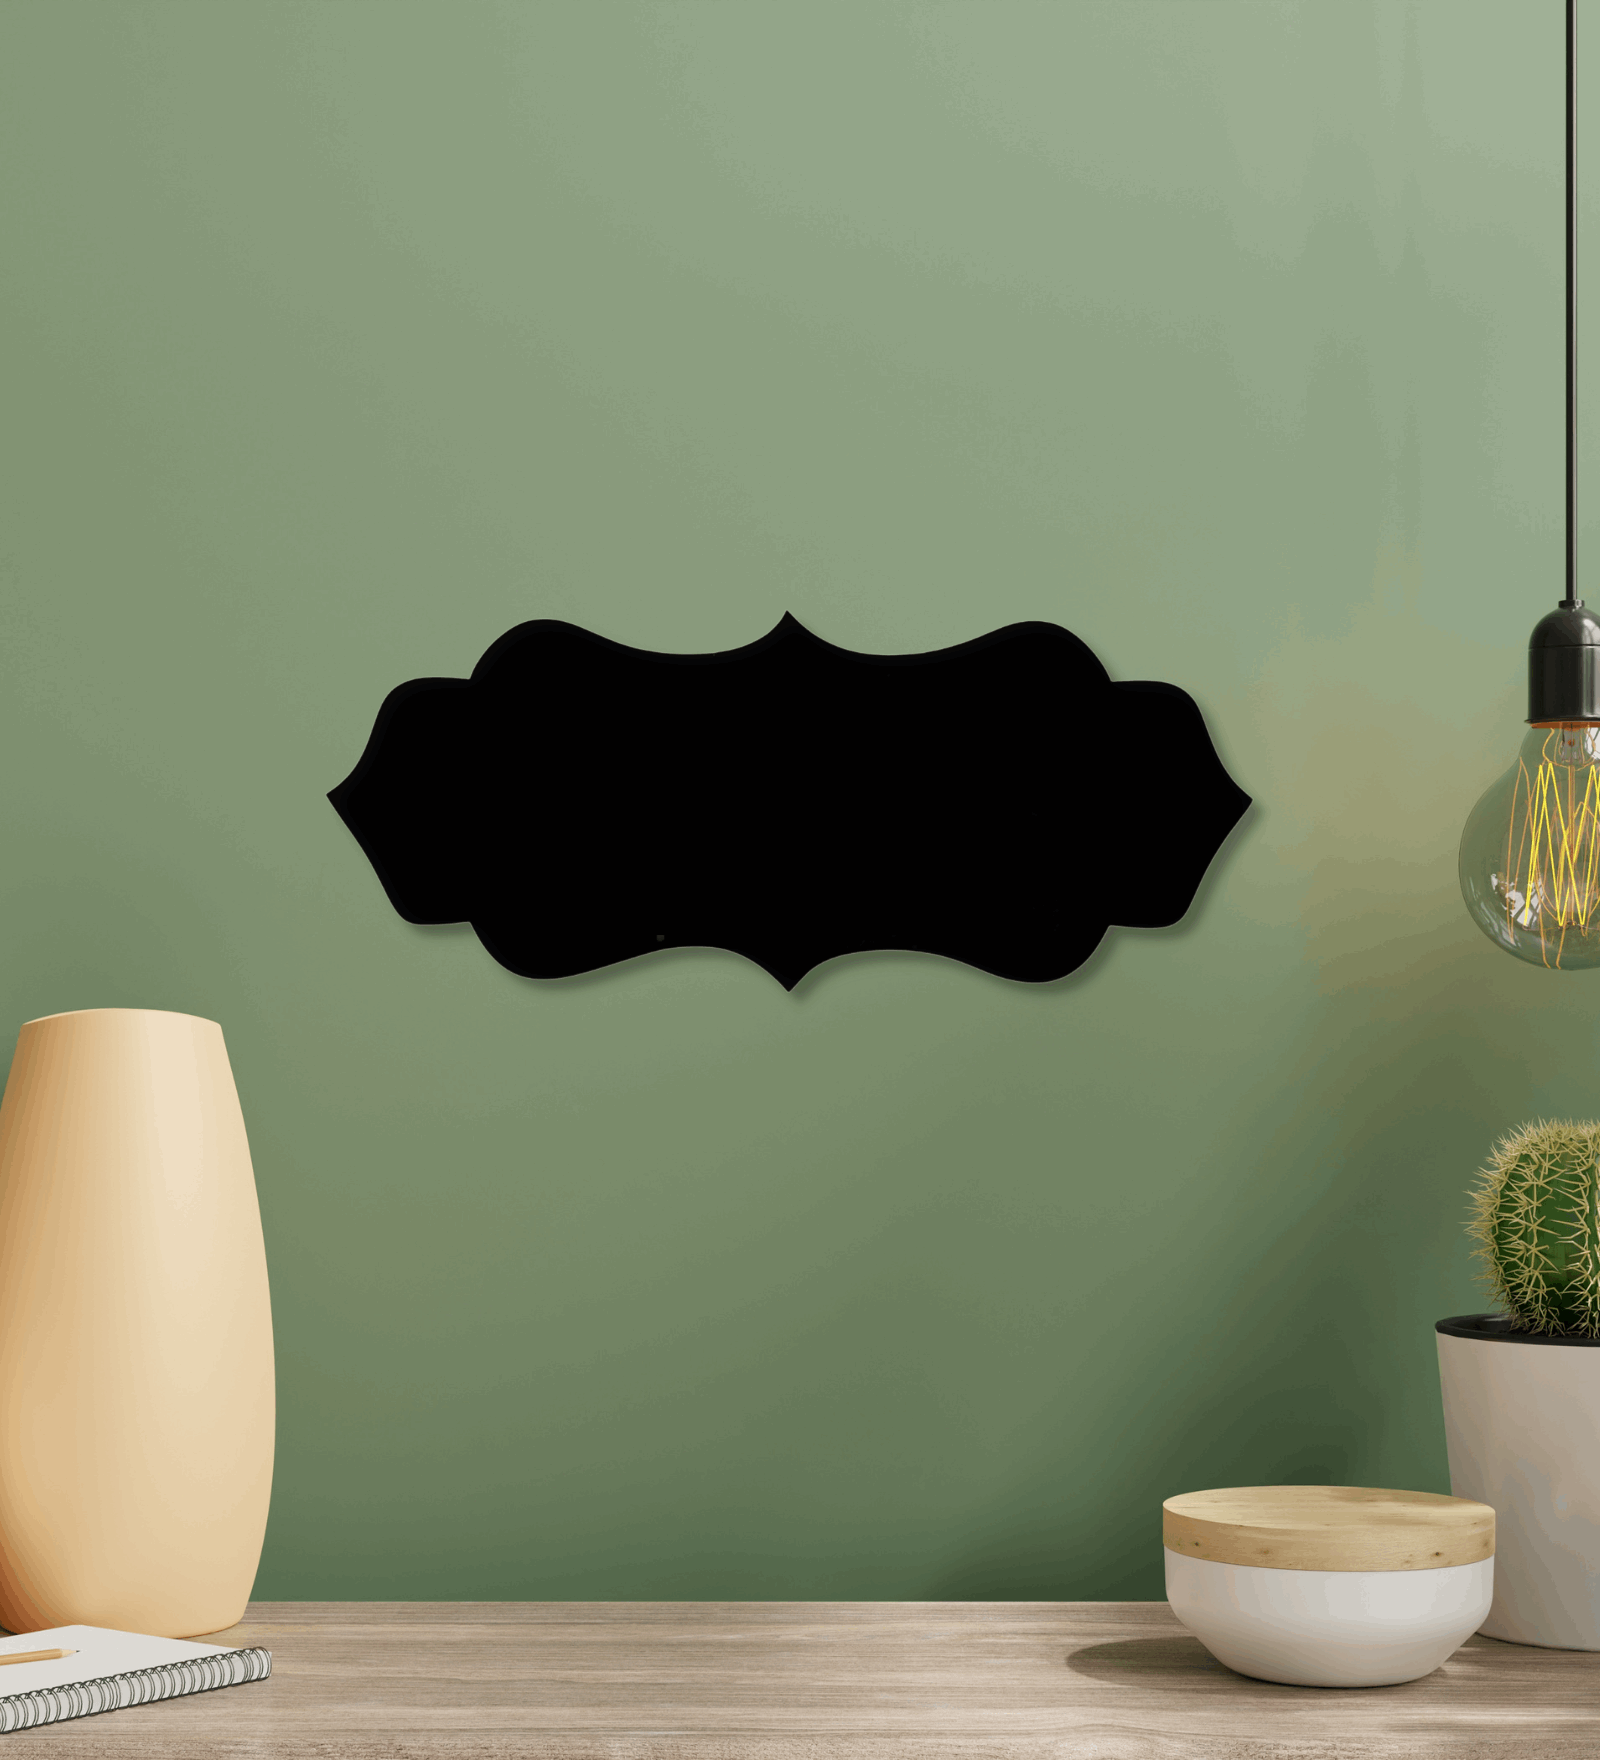 Unique Design Black Board For Kitchen or Gallery Wall Wemy Store